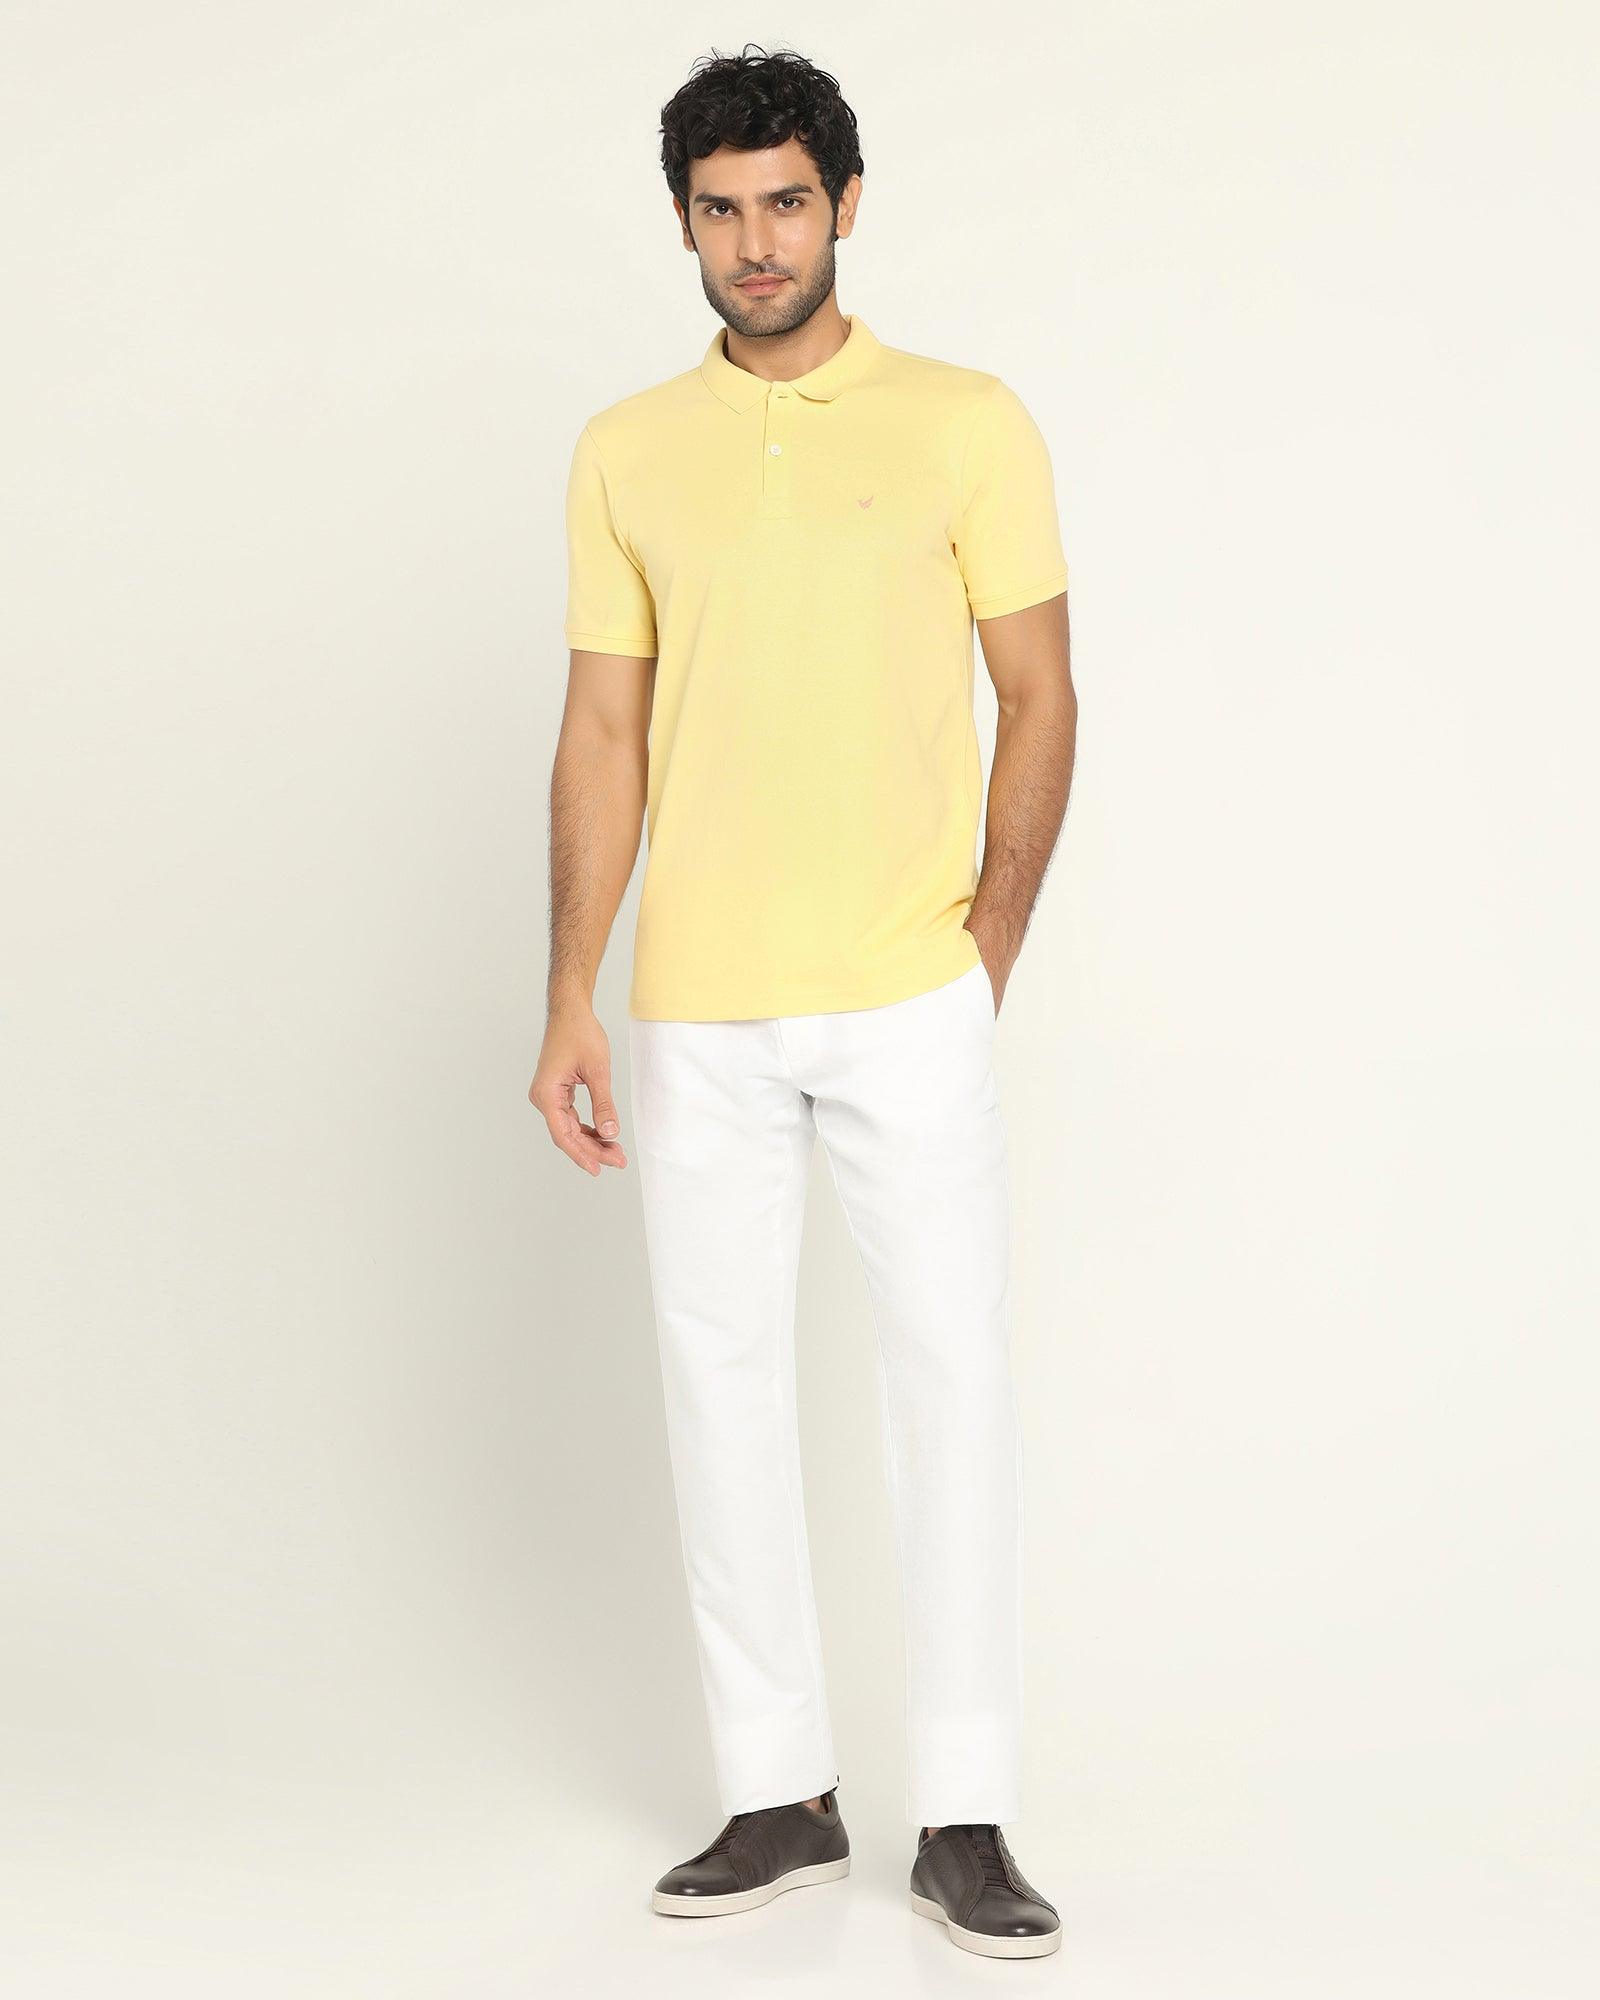 CAMPUS SUTRA Men Solid Casual Yellow Shirt - Buy CAMPUS SUTRA Men Solid  Casual Yellow Shirt Online at Best Prices in India | Flipkart.com